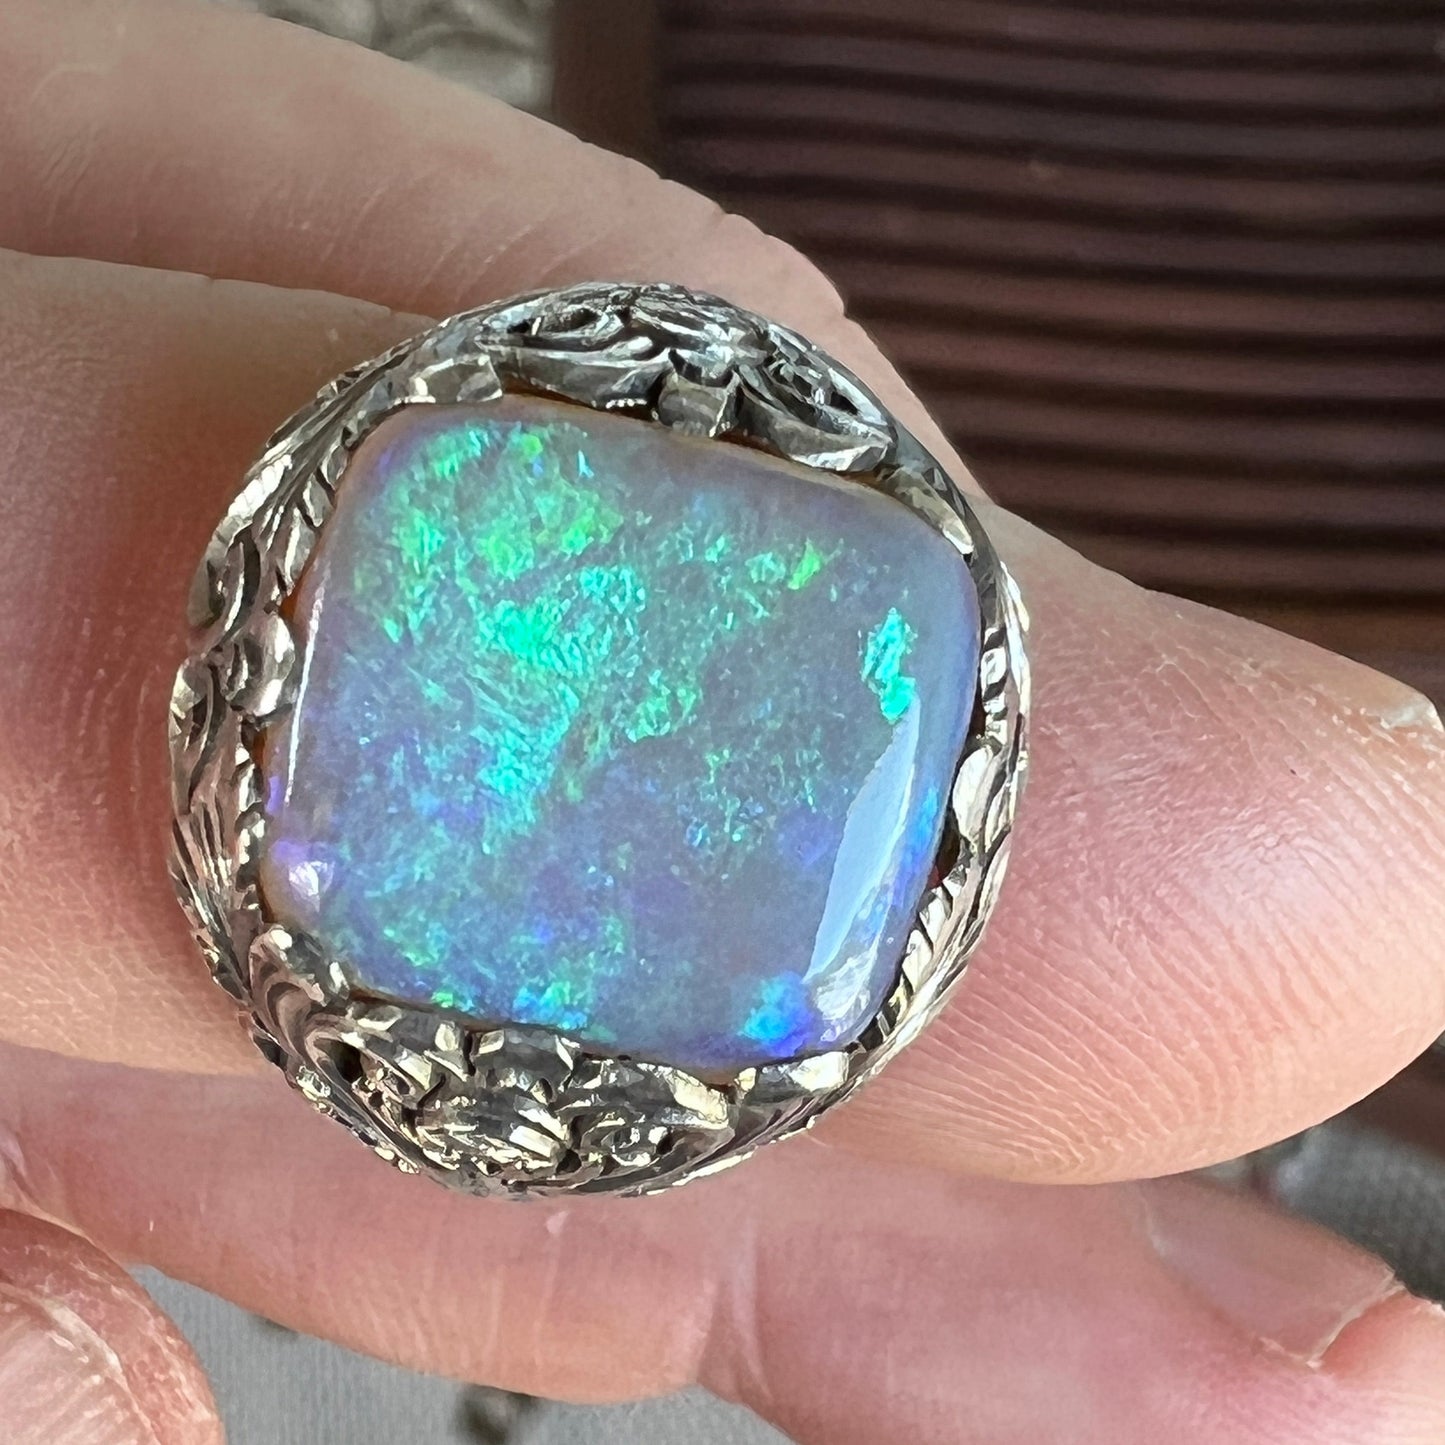 Fantastic one-off silver ring, crafted to show off this awesome Coober Pedy crystal opal. Square cushion cut showing magnificent greens.